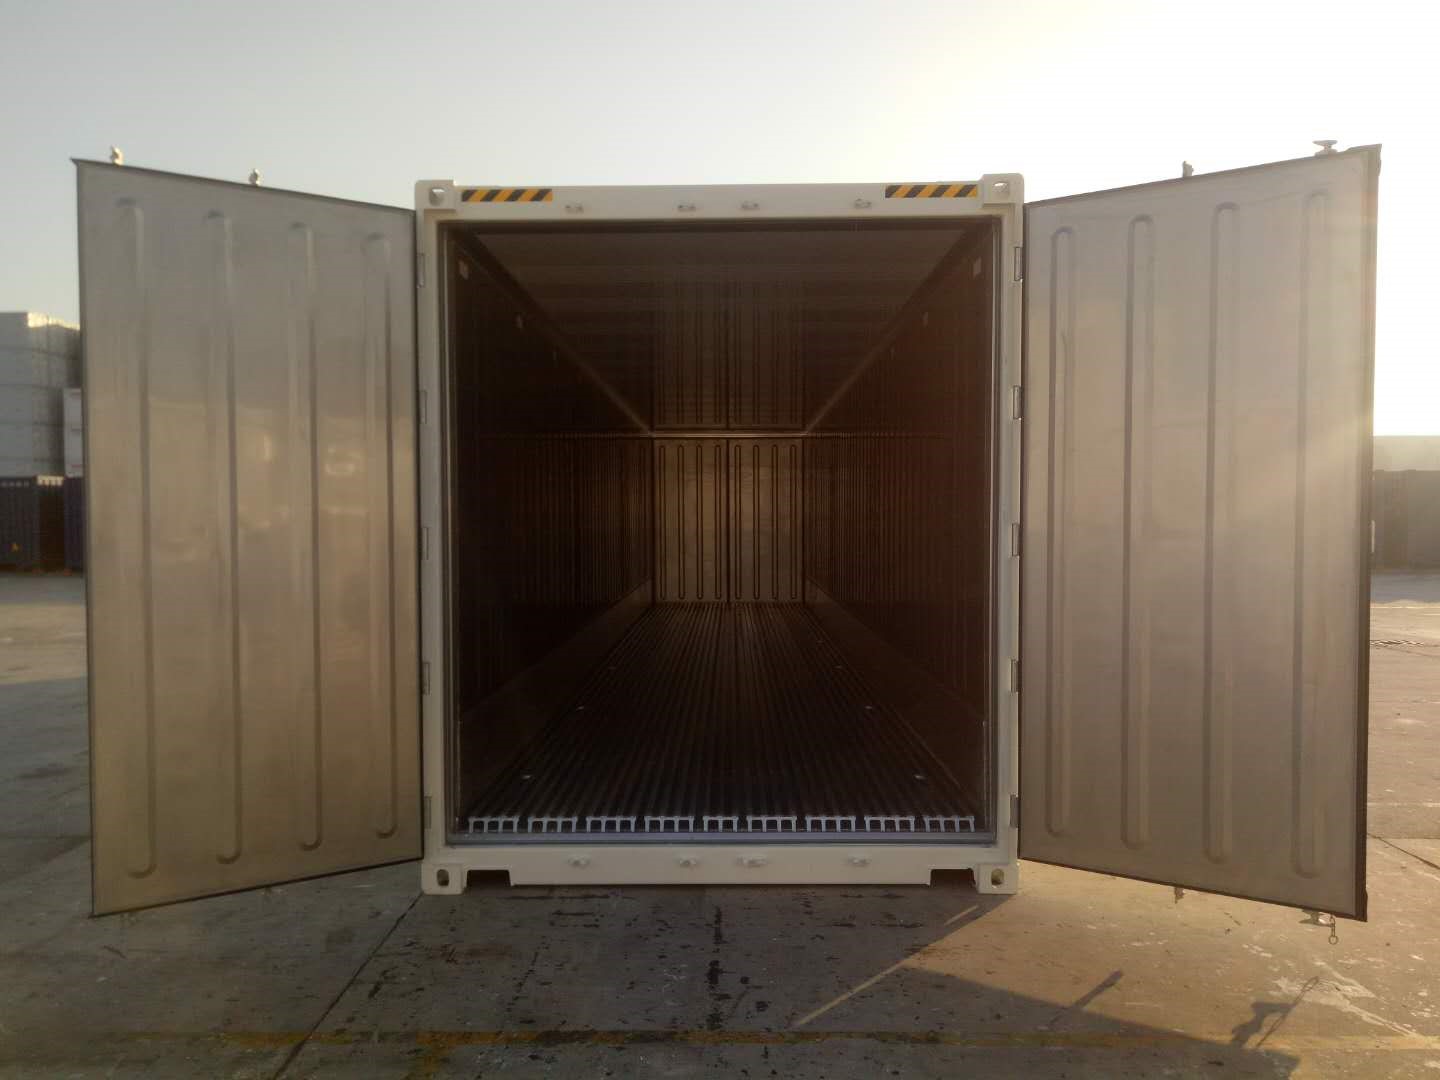 Insulated Shipping Containers for Sale: New & Used - Interport